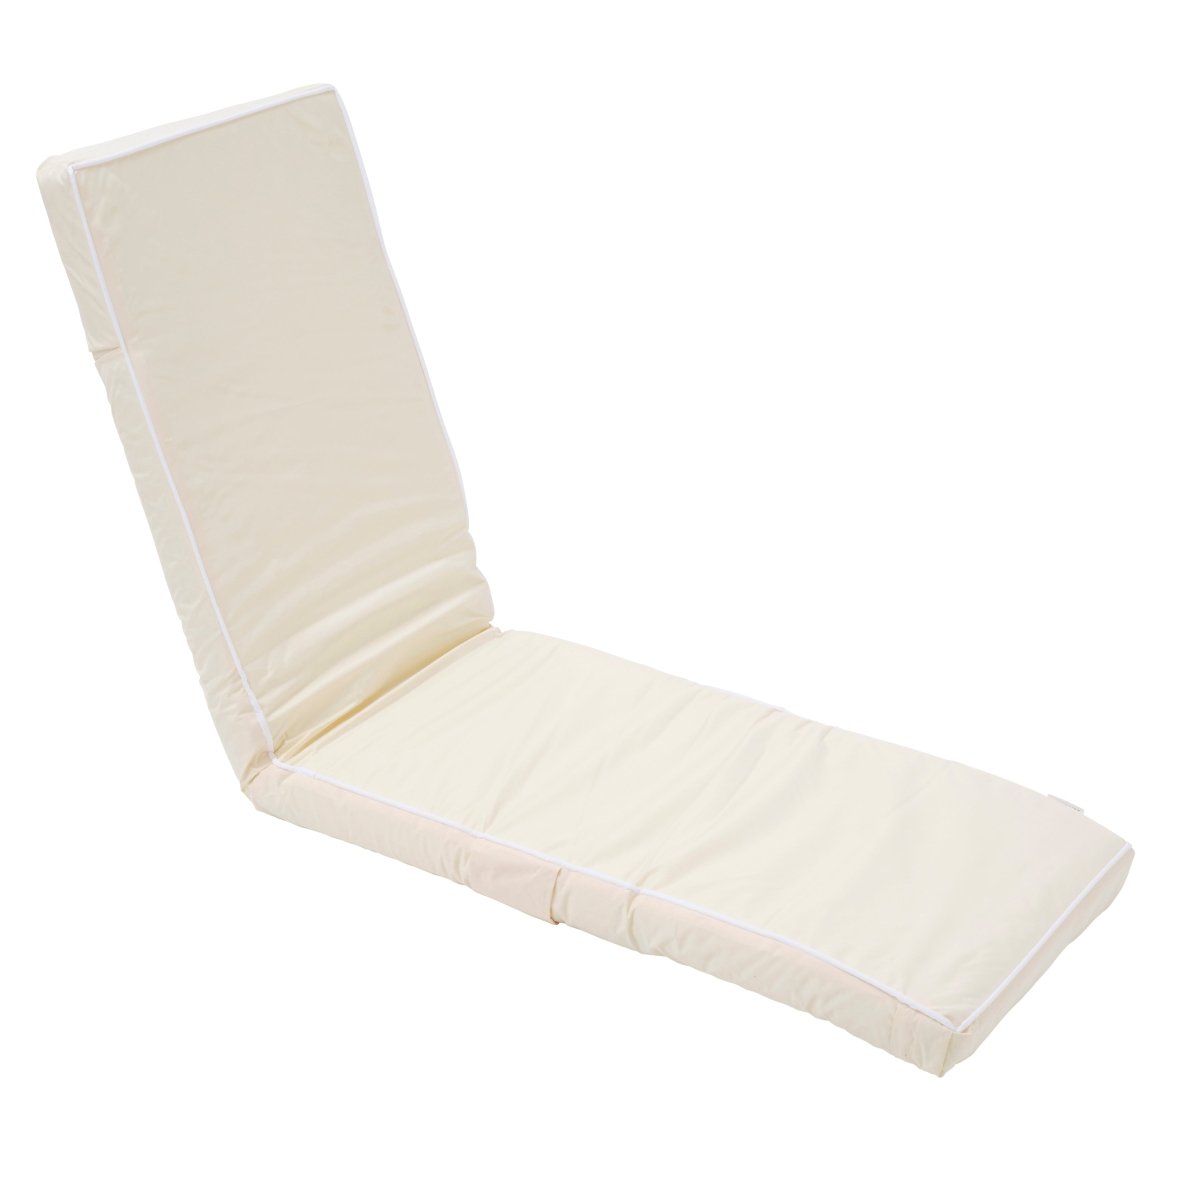 SUNNYLiFE The Lounger Chair Sand - S31LNGSN